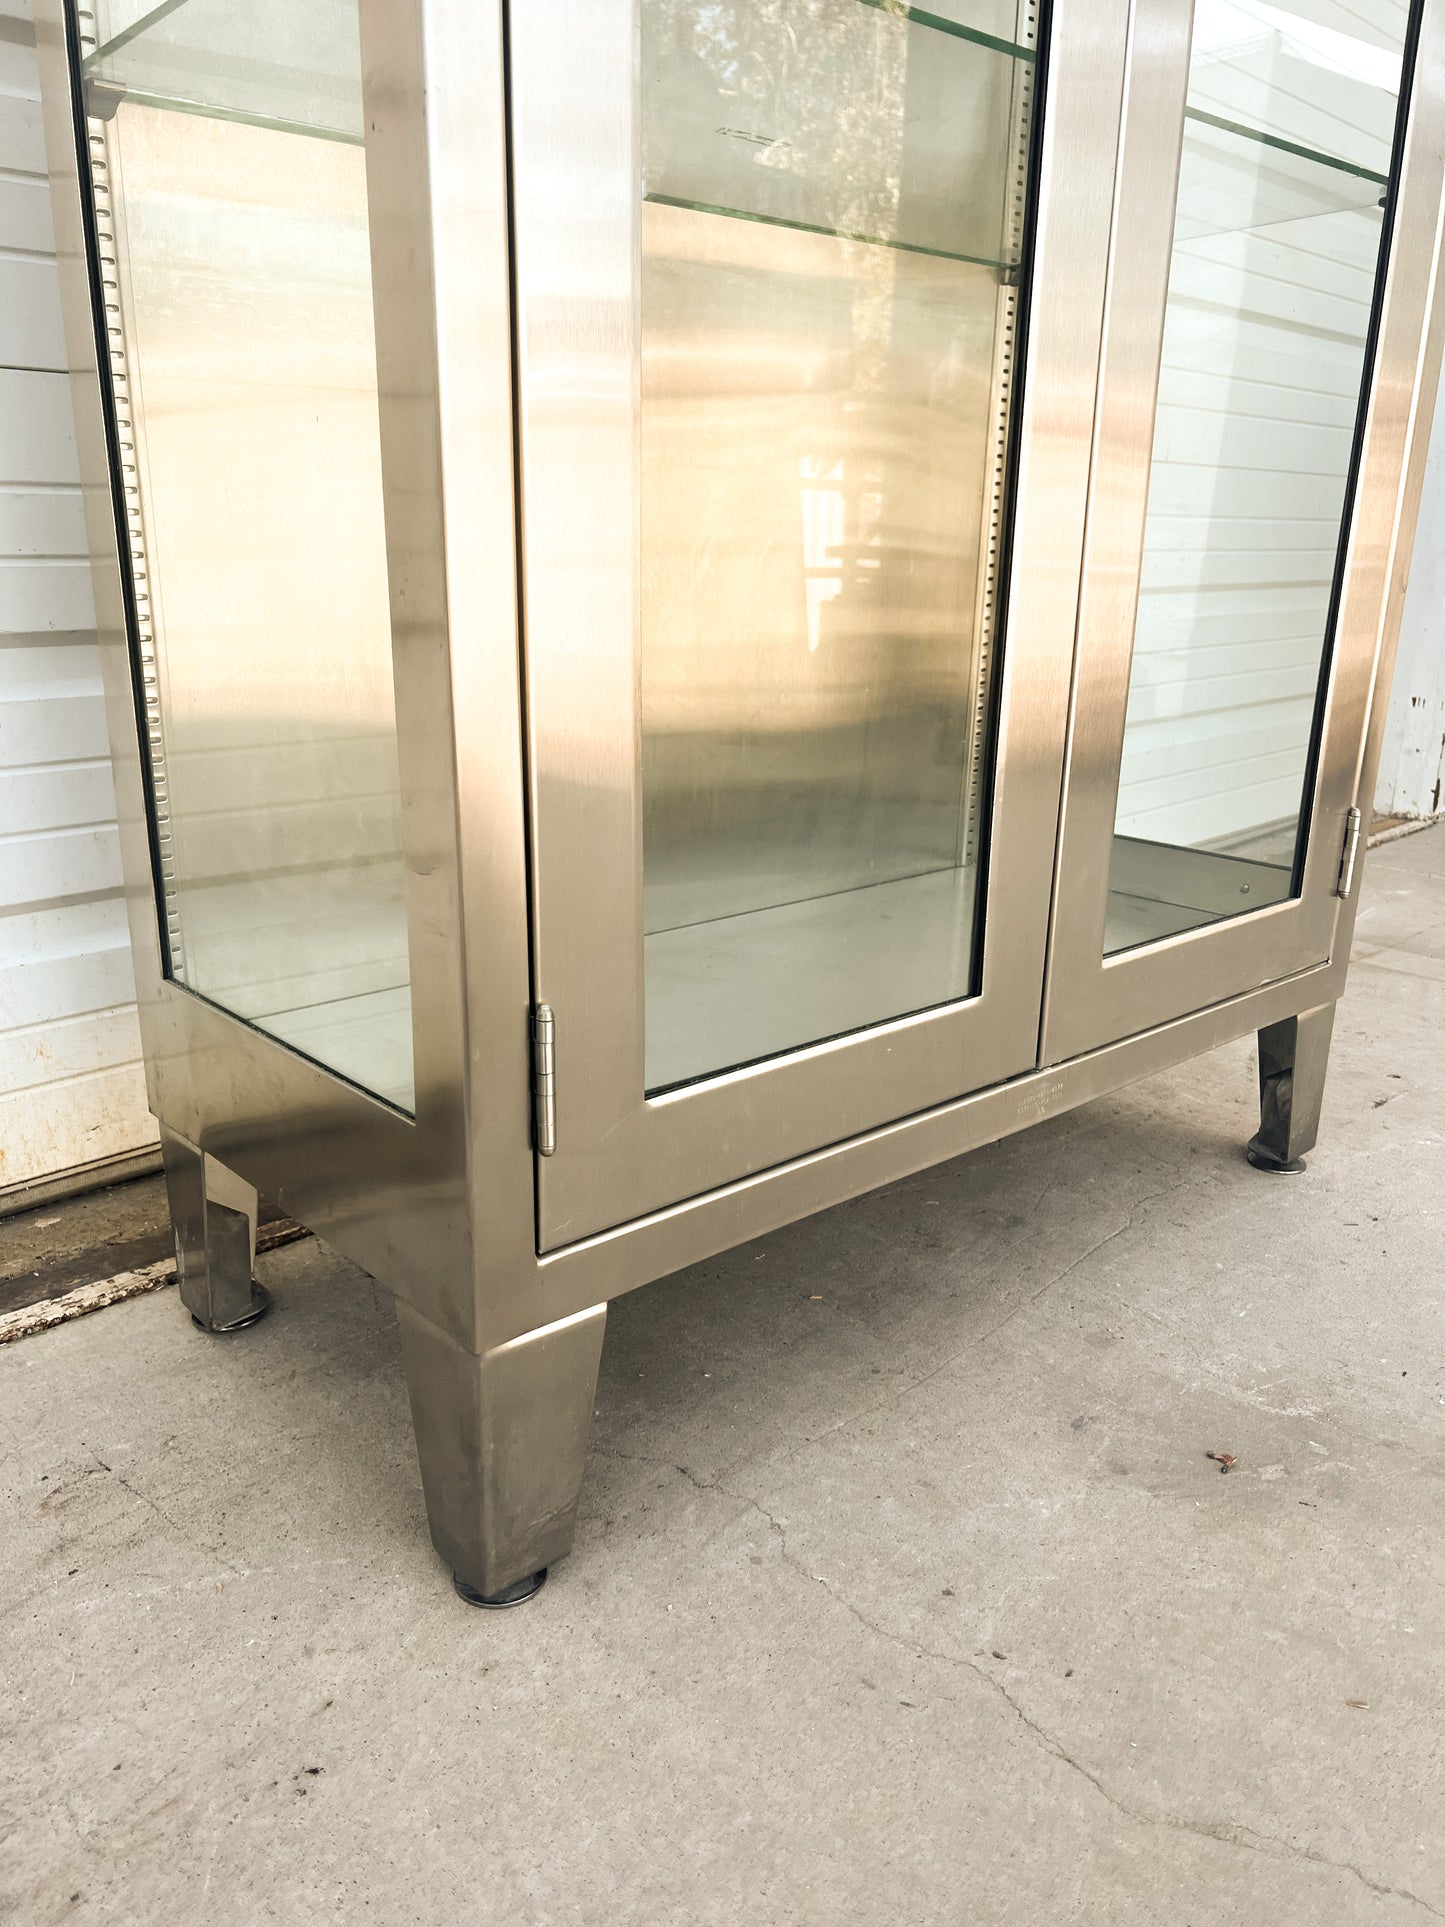 Stainless Steel Cabinet with Glass Shelves